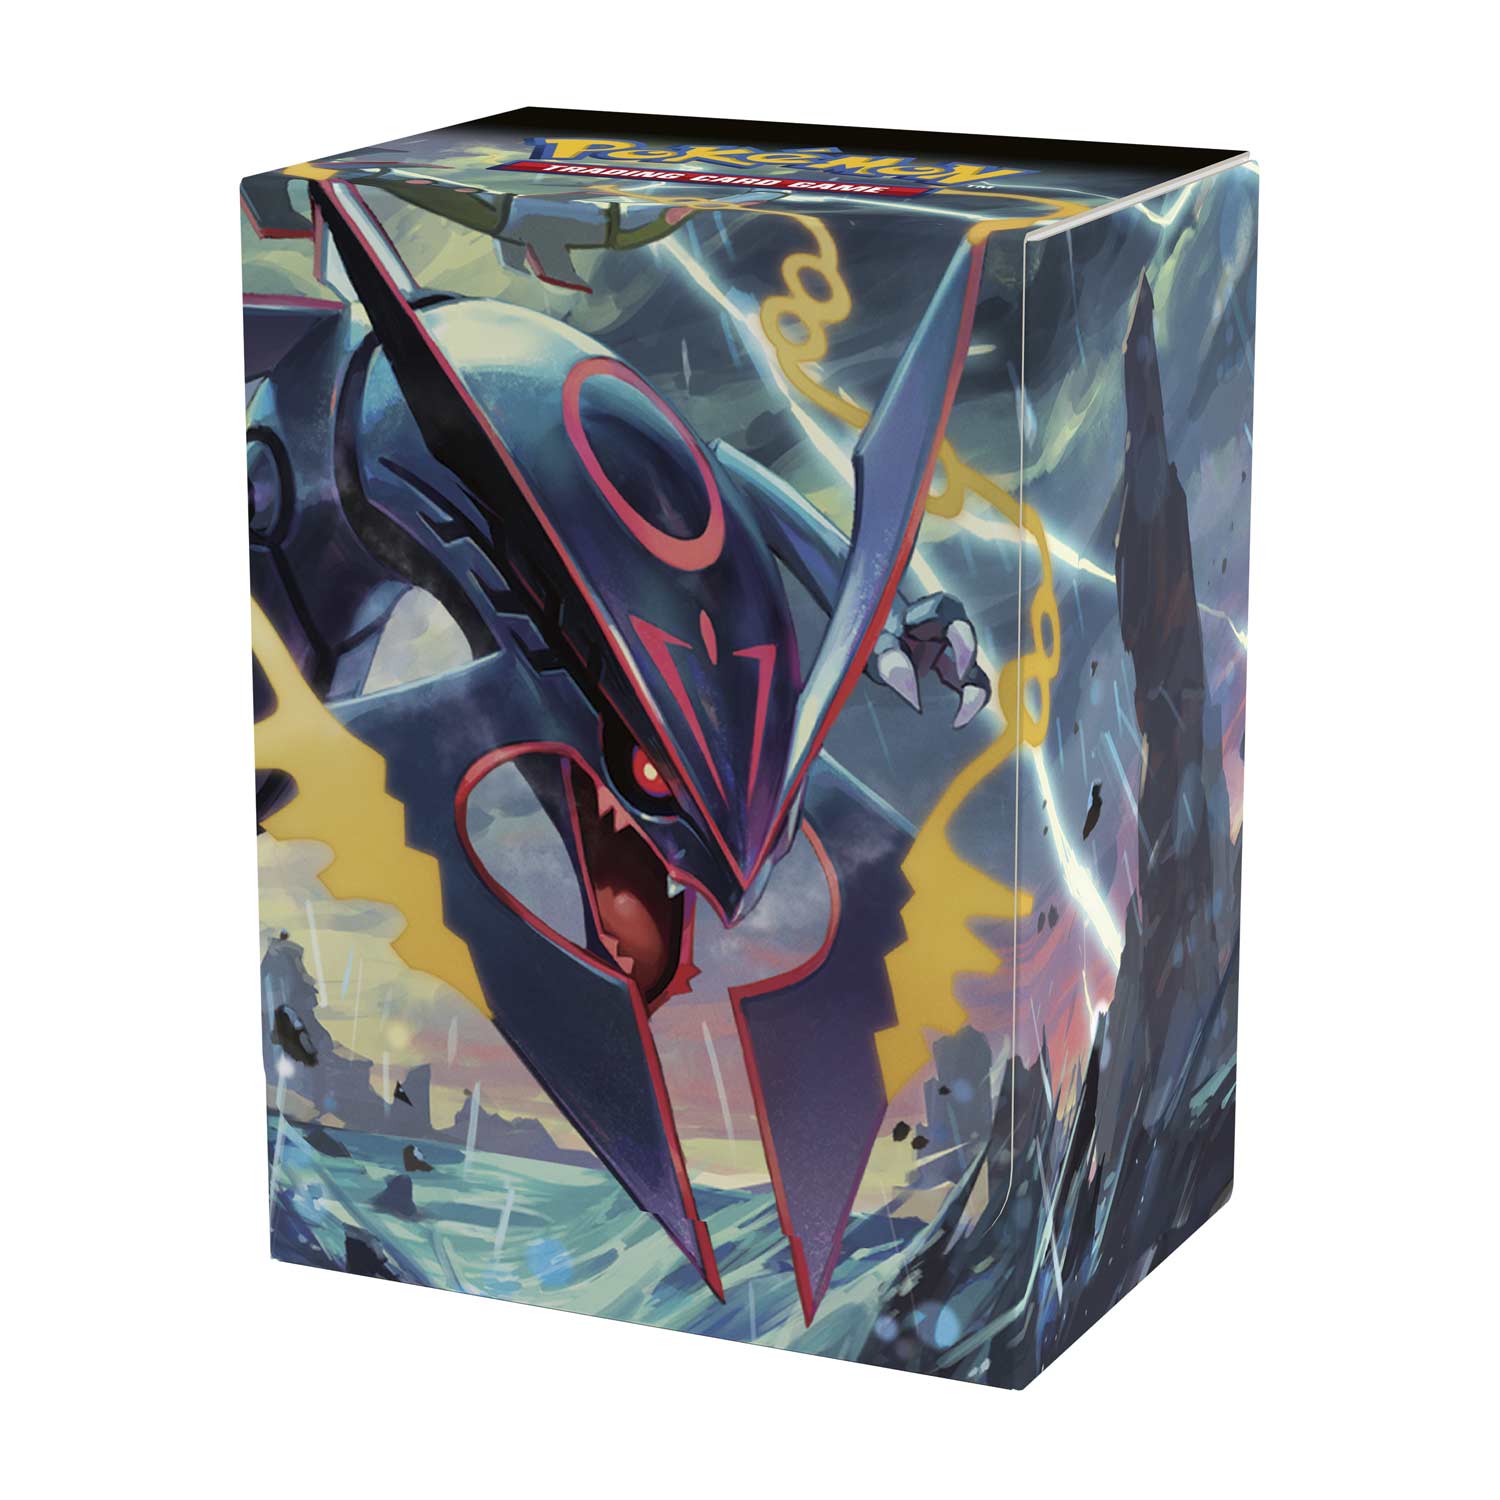 Shiny Mega Rayquaza Deck Box with Two Dividers for Pokemon Trading Cards SG_B017WVBSG4_US